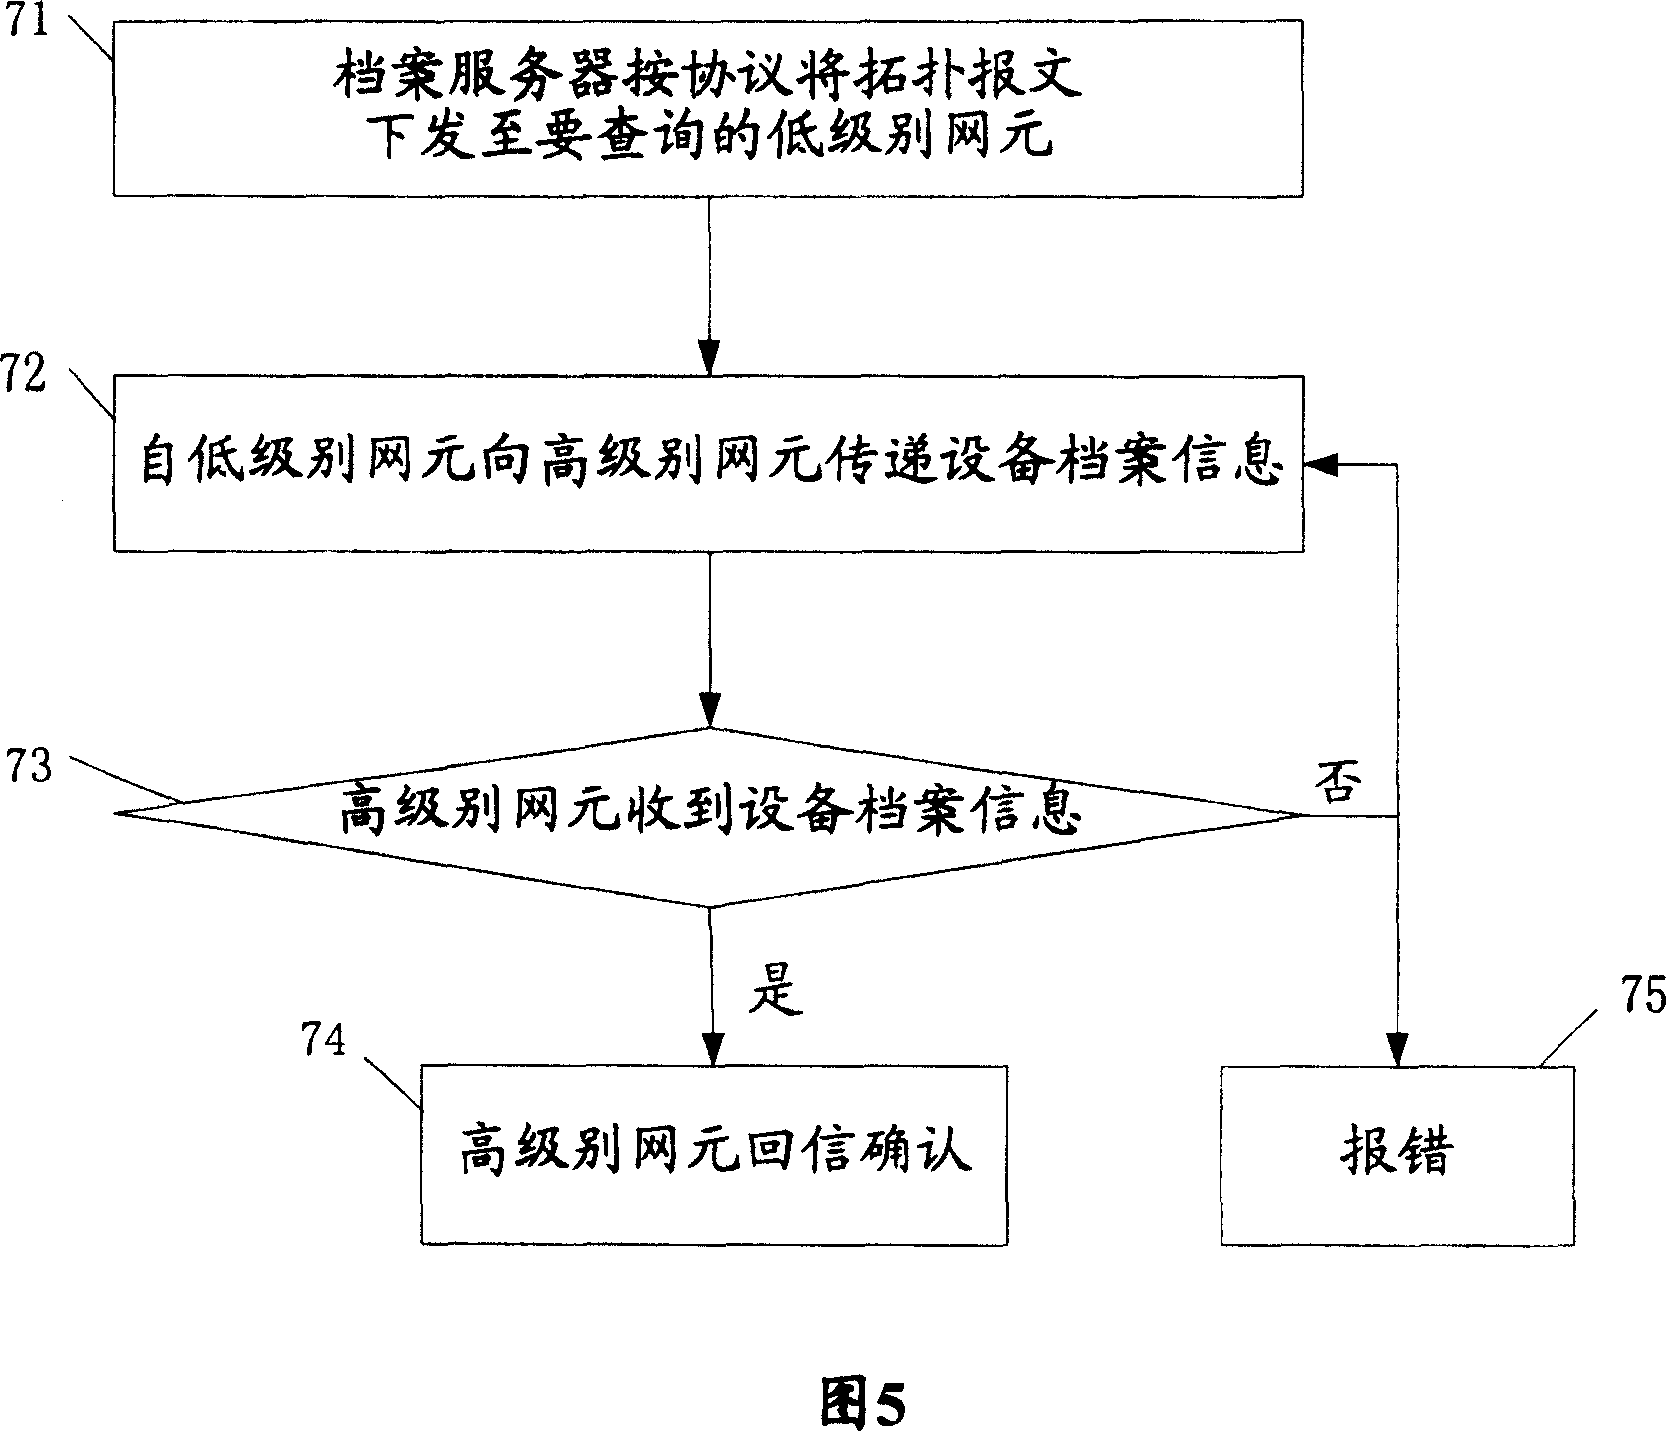 Management system and method for archives of equipment